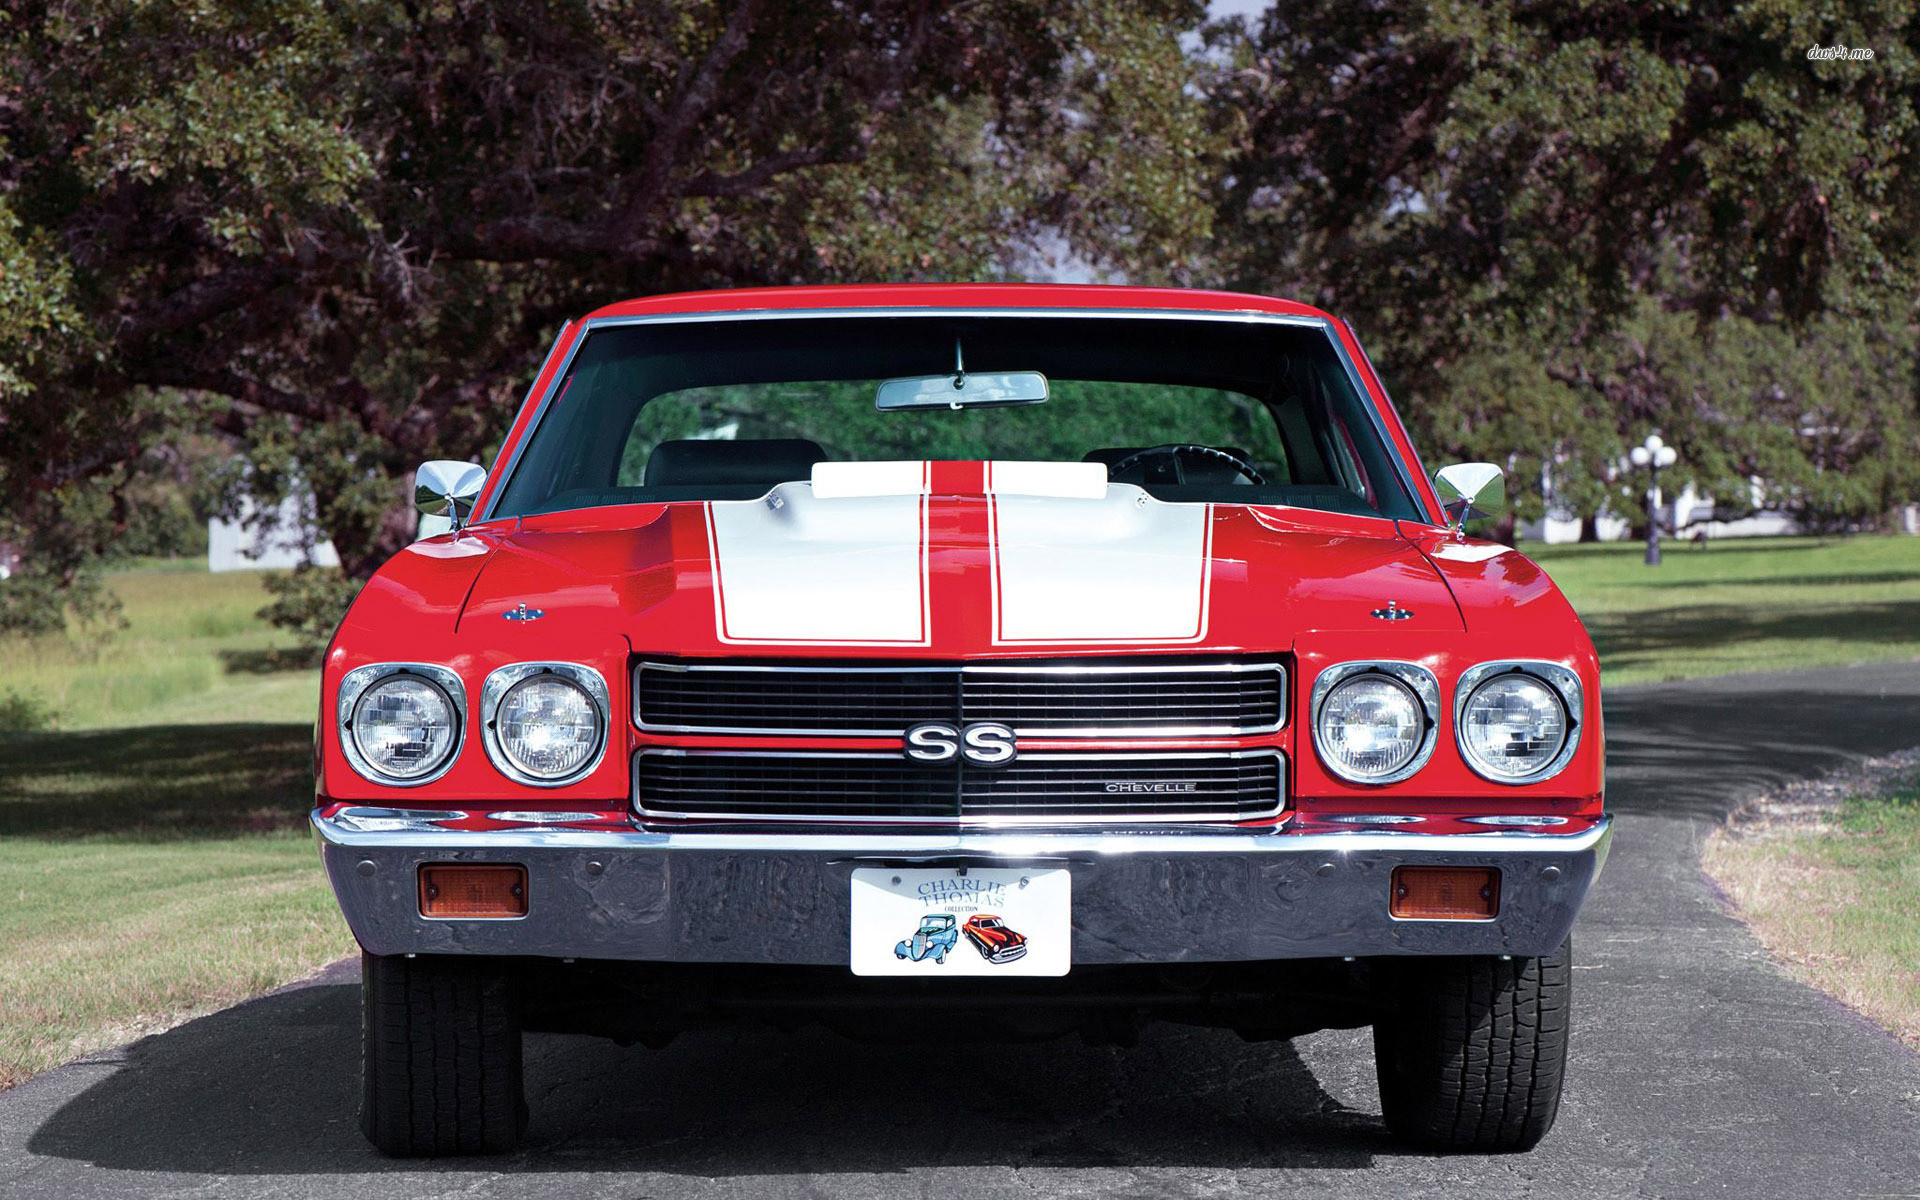 62 Chevelle Wallpapers on WallpaperPlay